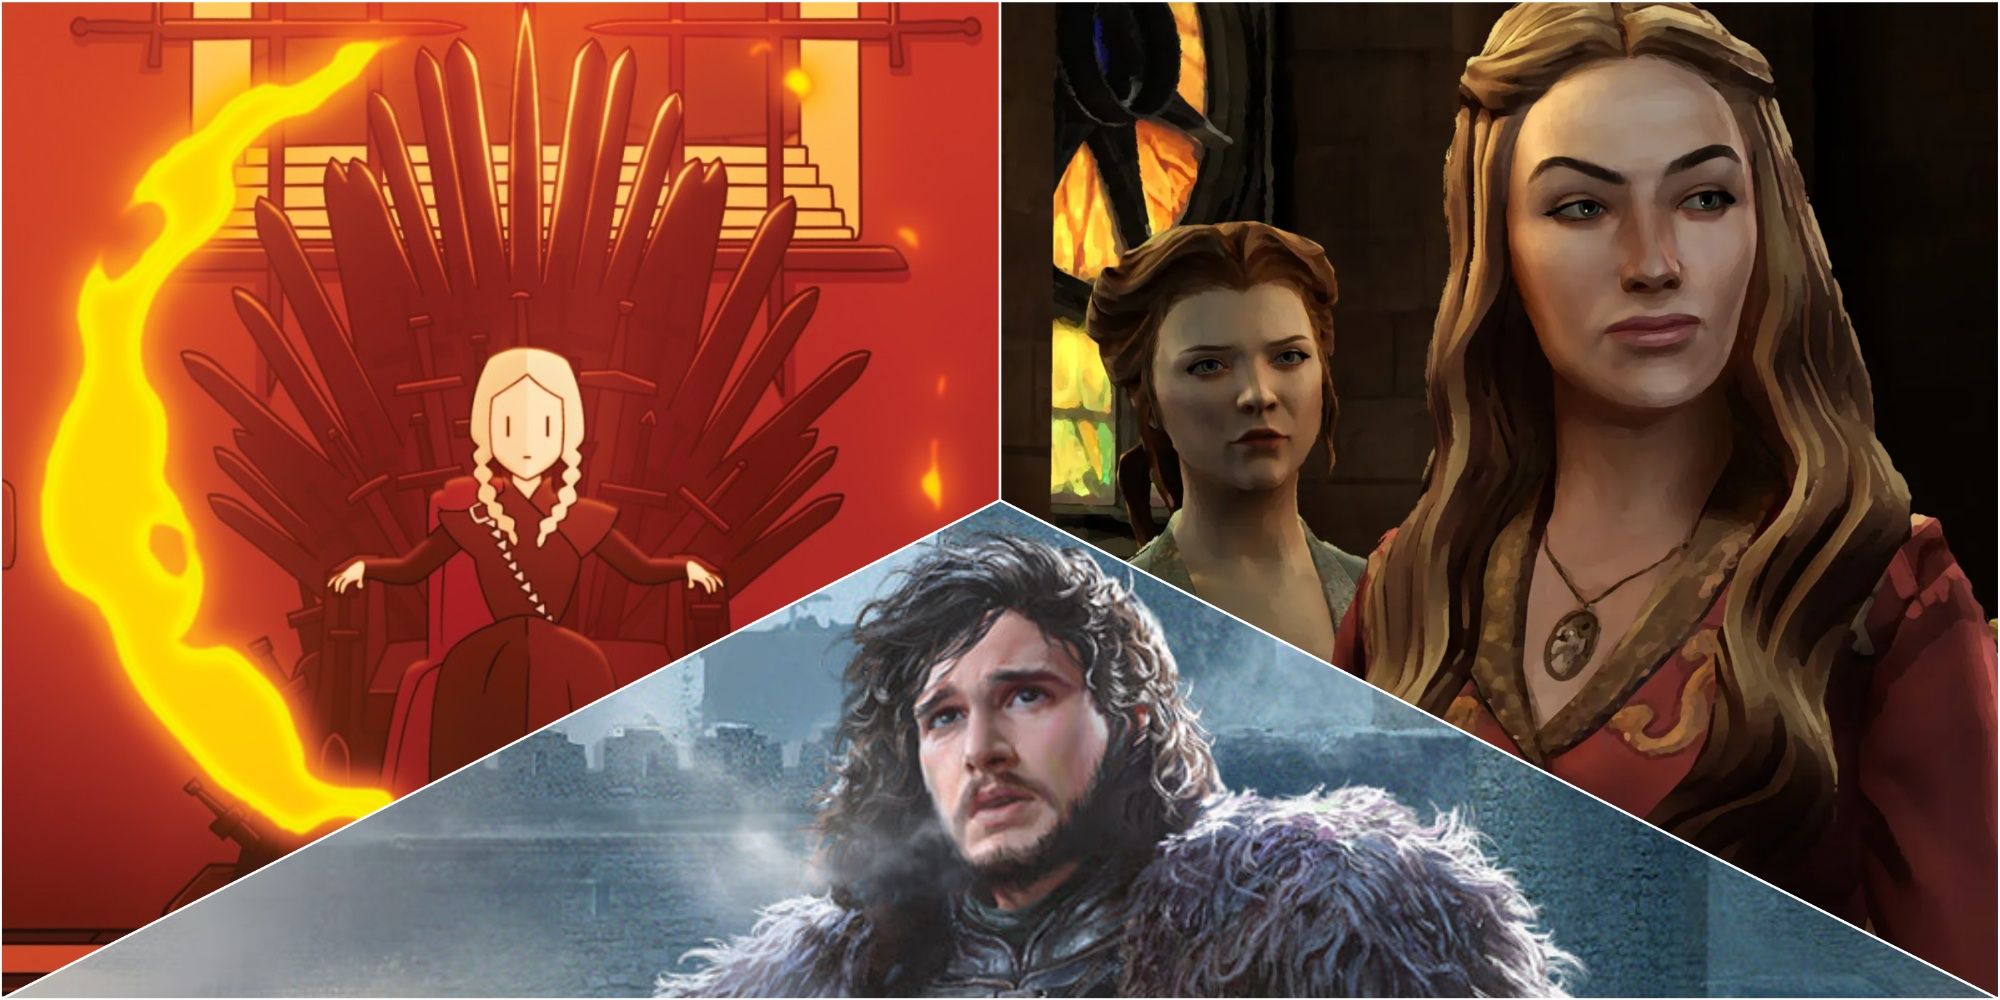 Reigns: Game of Thrones with Daenerys Targaryen on the Iron Throne, Game of Thrones: Winter is Coming with Jon Snow, and Telltale Games Game Of Thrones with Margaery Tyrell and Cersei Lannister